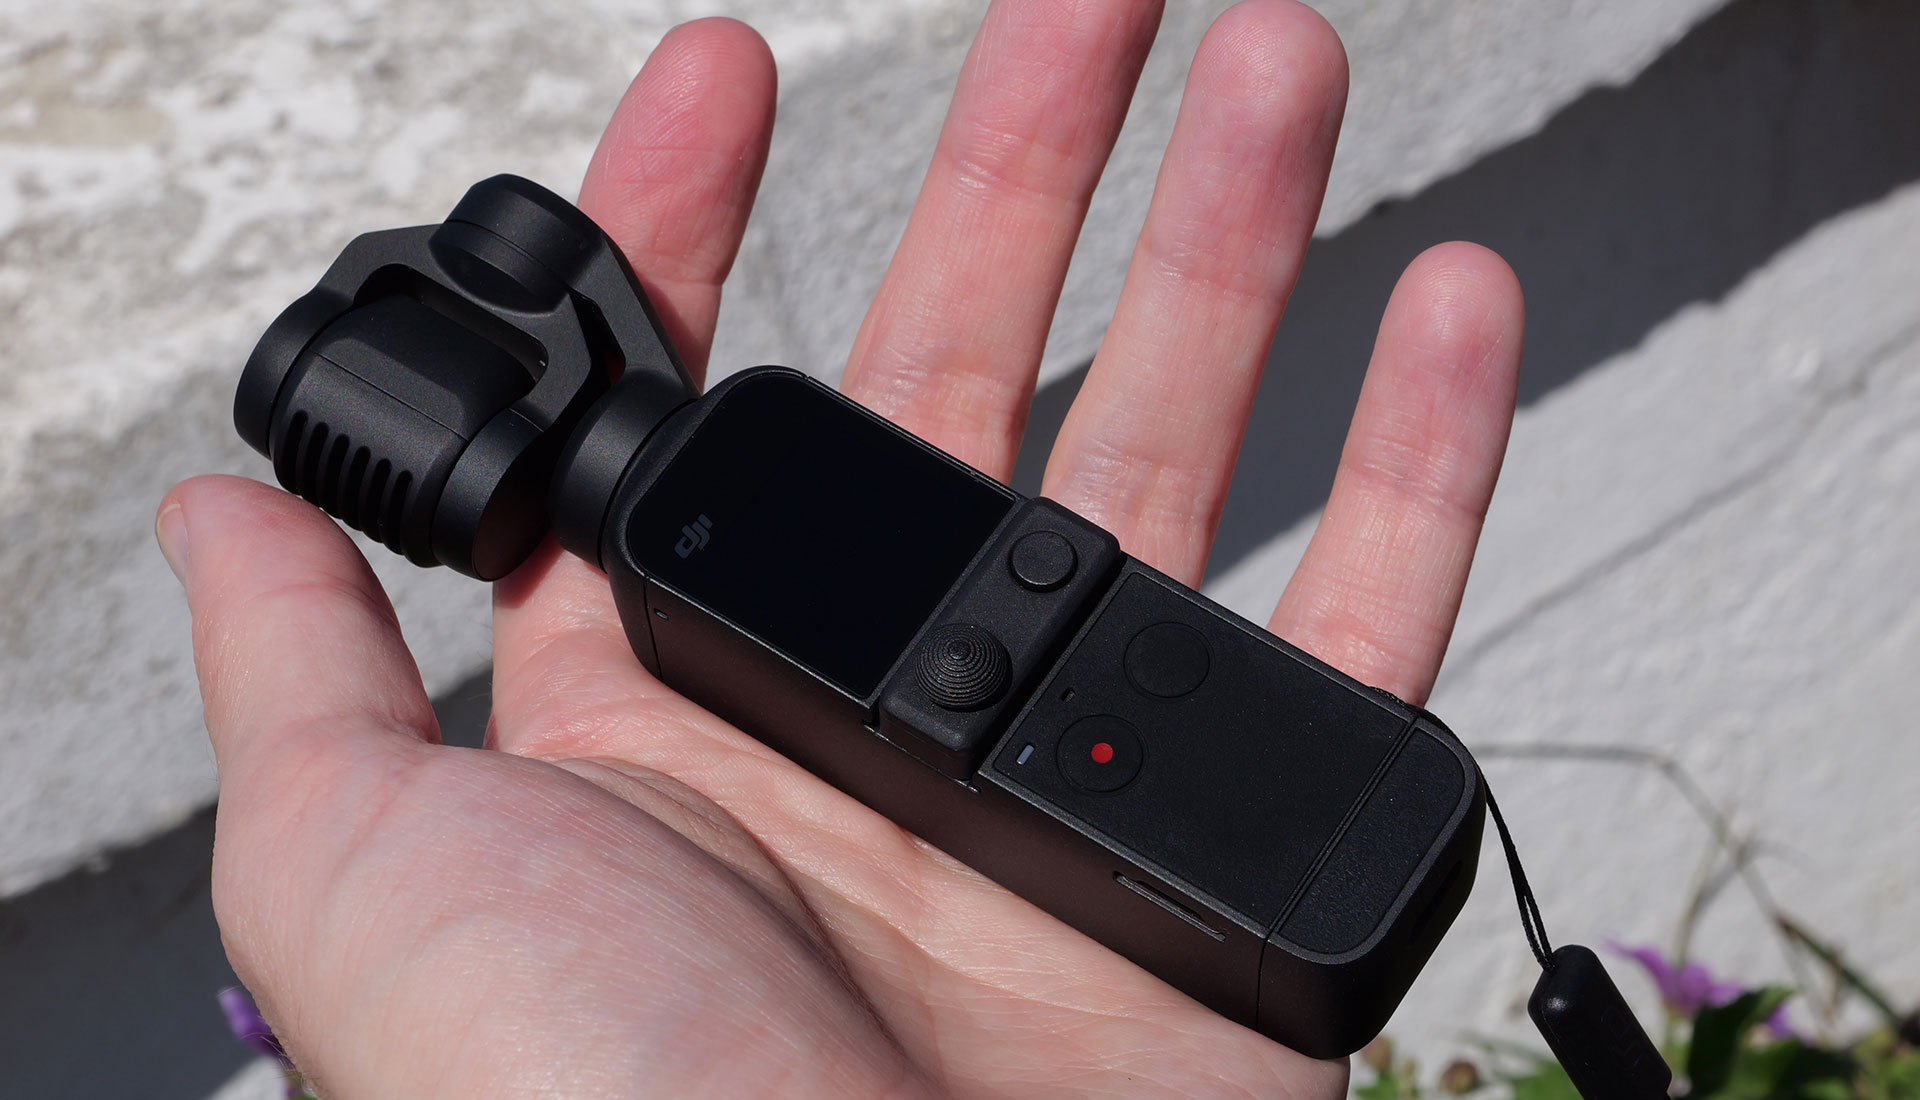 DJI's Pocket 2 gimbal is an extremely fun way to grab impressive smartphone  shots